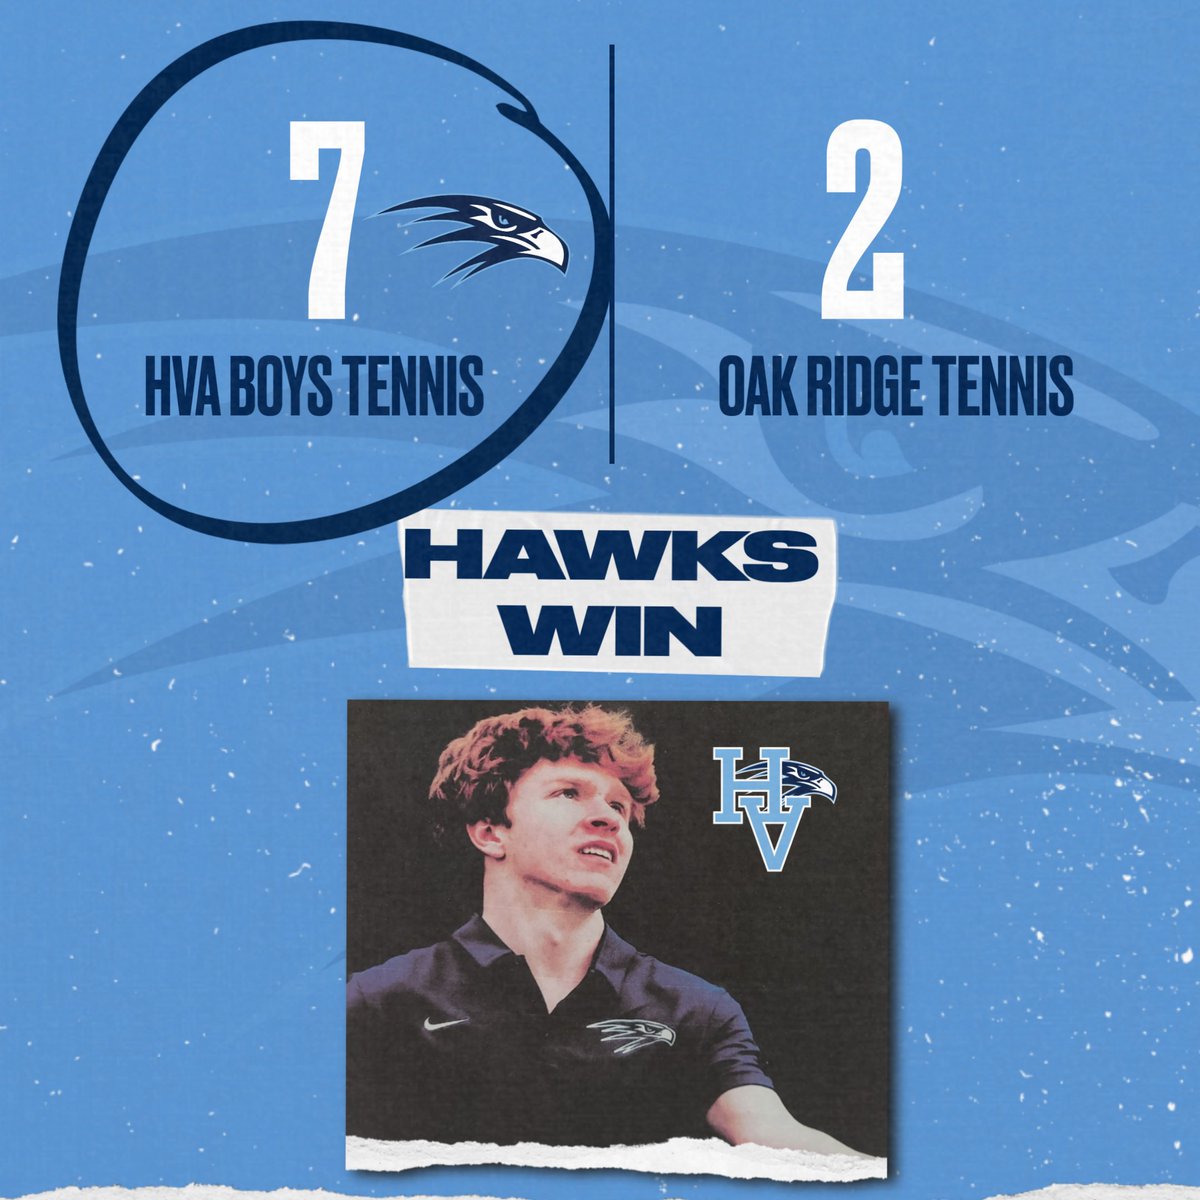 HVA Boys 🎾team win 150 by a score of 7-2 over Oak Ridge. Team is 150-44 all time. Cael & Trevor win on Senior Day 🎓Lucas Wilson now over 80 match wins. Won his match 8-1 for Win Number 81. @HVAAthletics